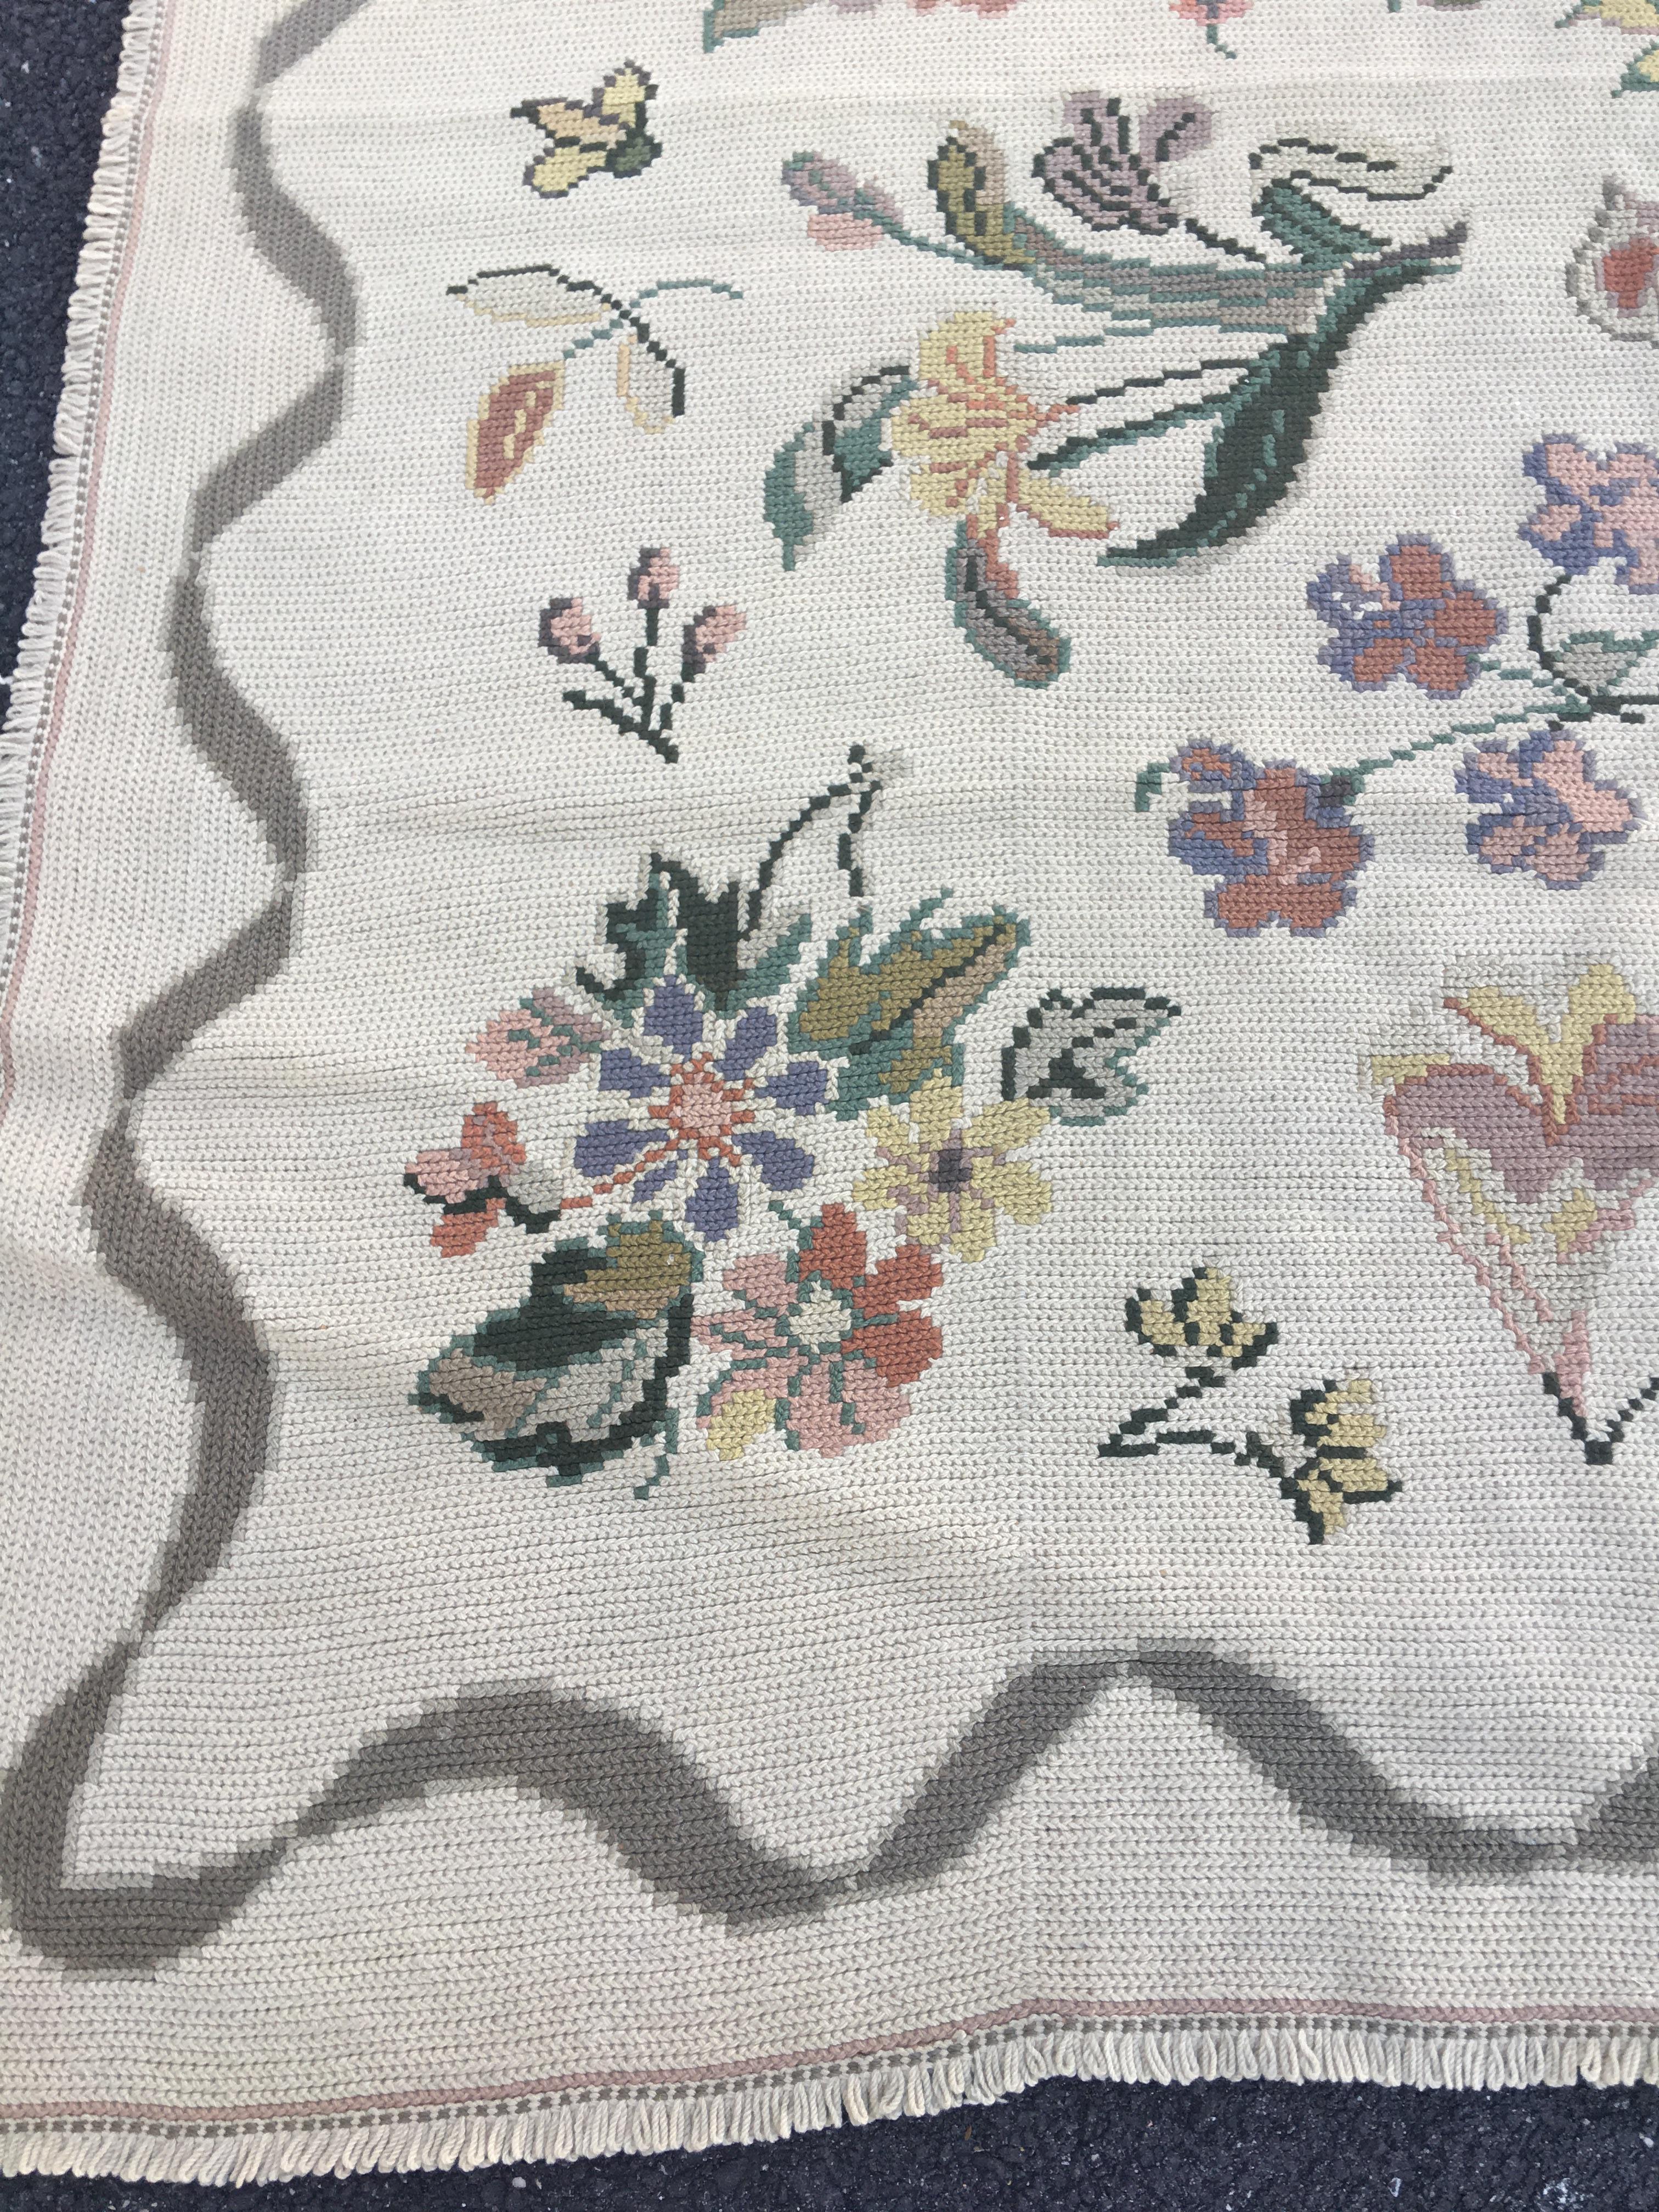 Austrian Antique Ivory Portuguese Needlepoint Rug with Flowers, circa 1930-1940s For Sale